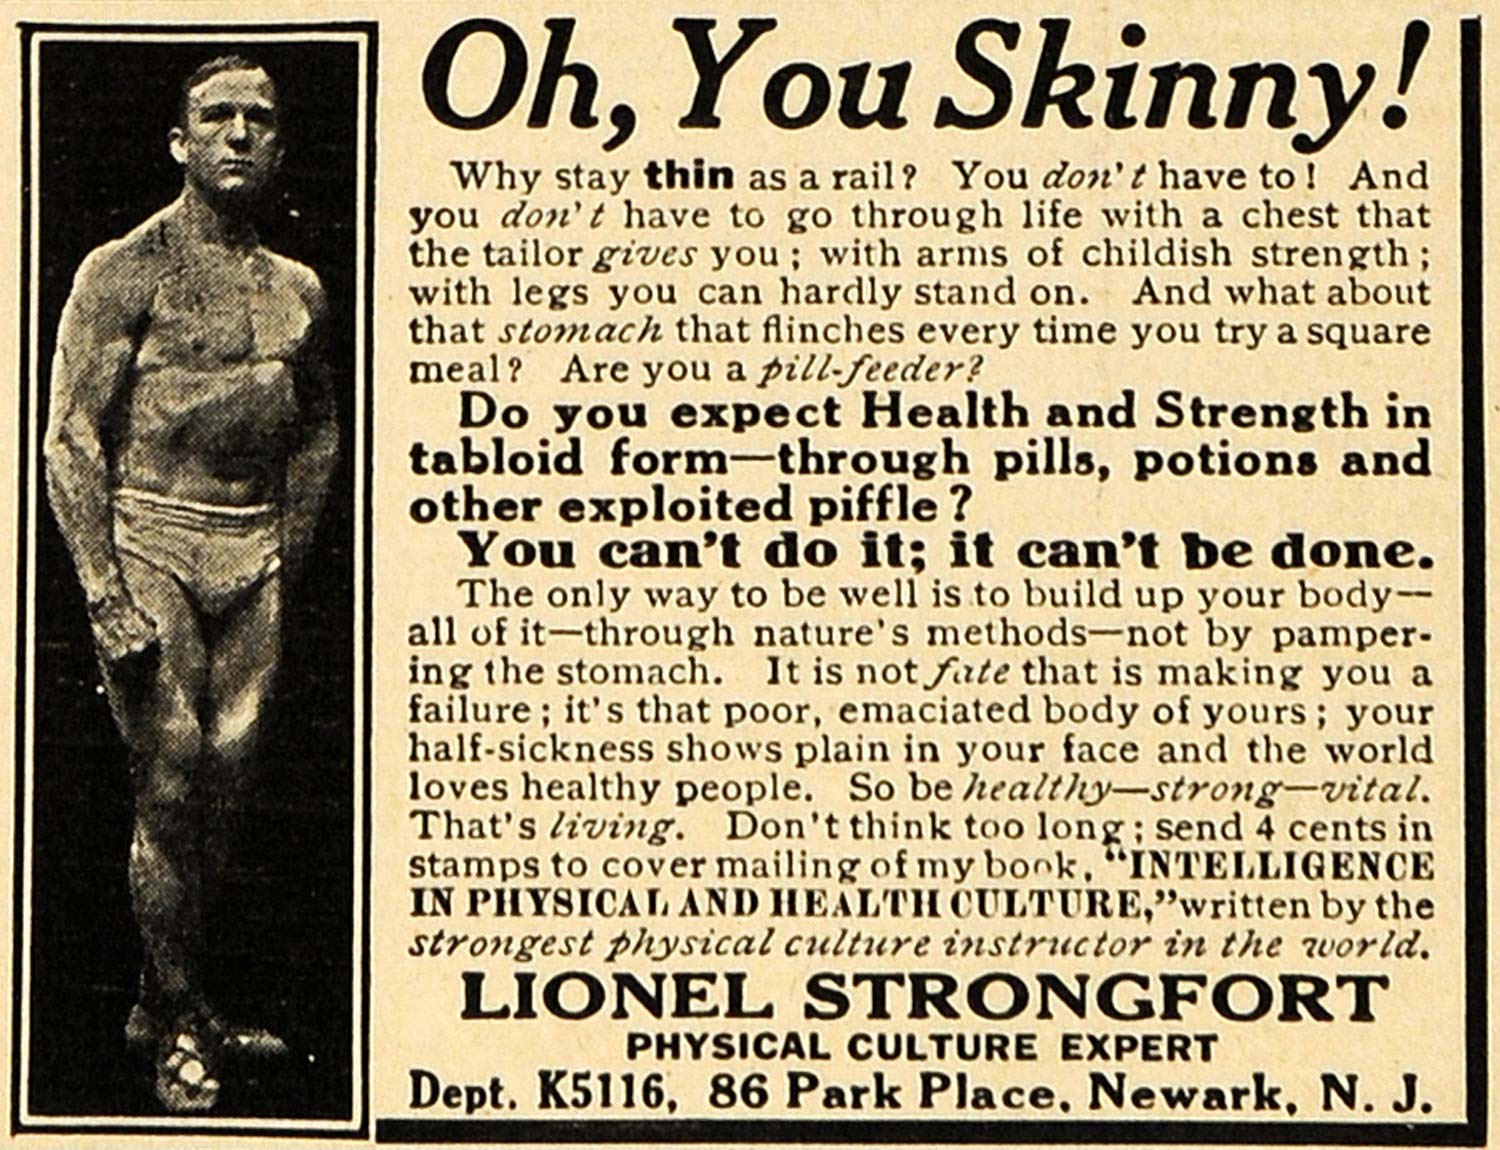 1916 Ad Lionel Strongfort Strong Oh You So Skinny! WWI - ORIGINAL ILW1